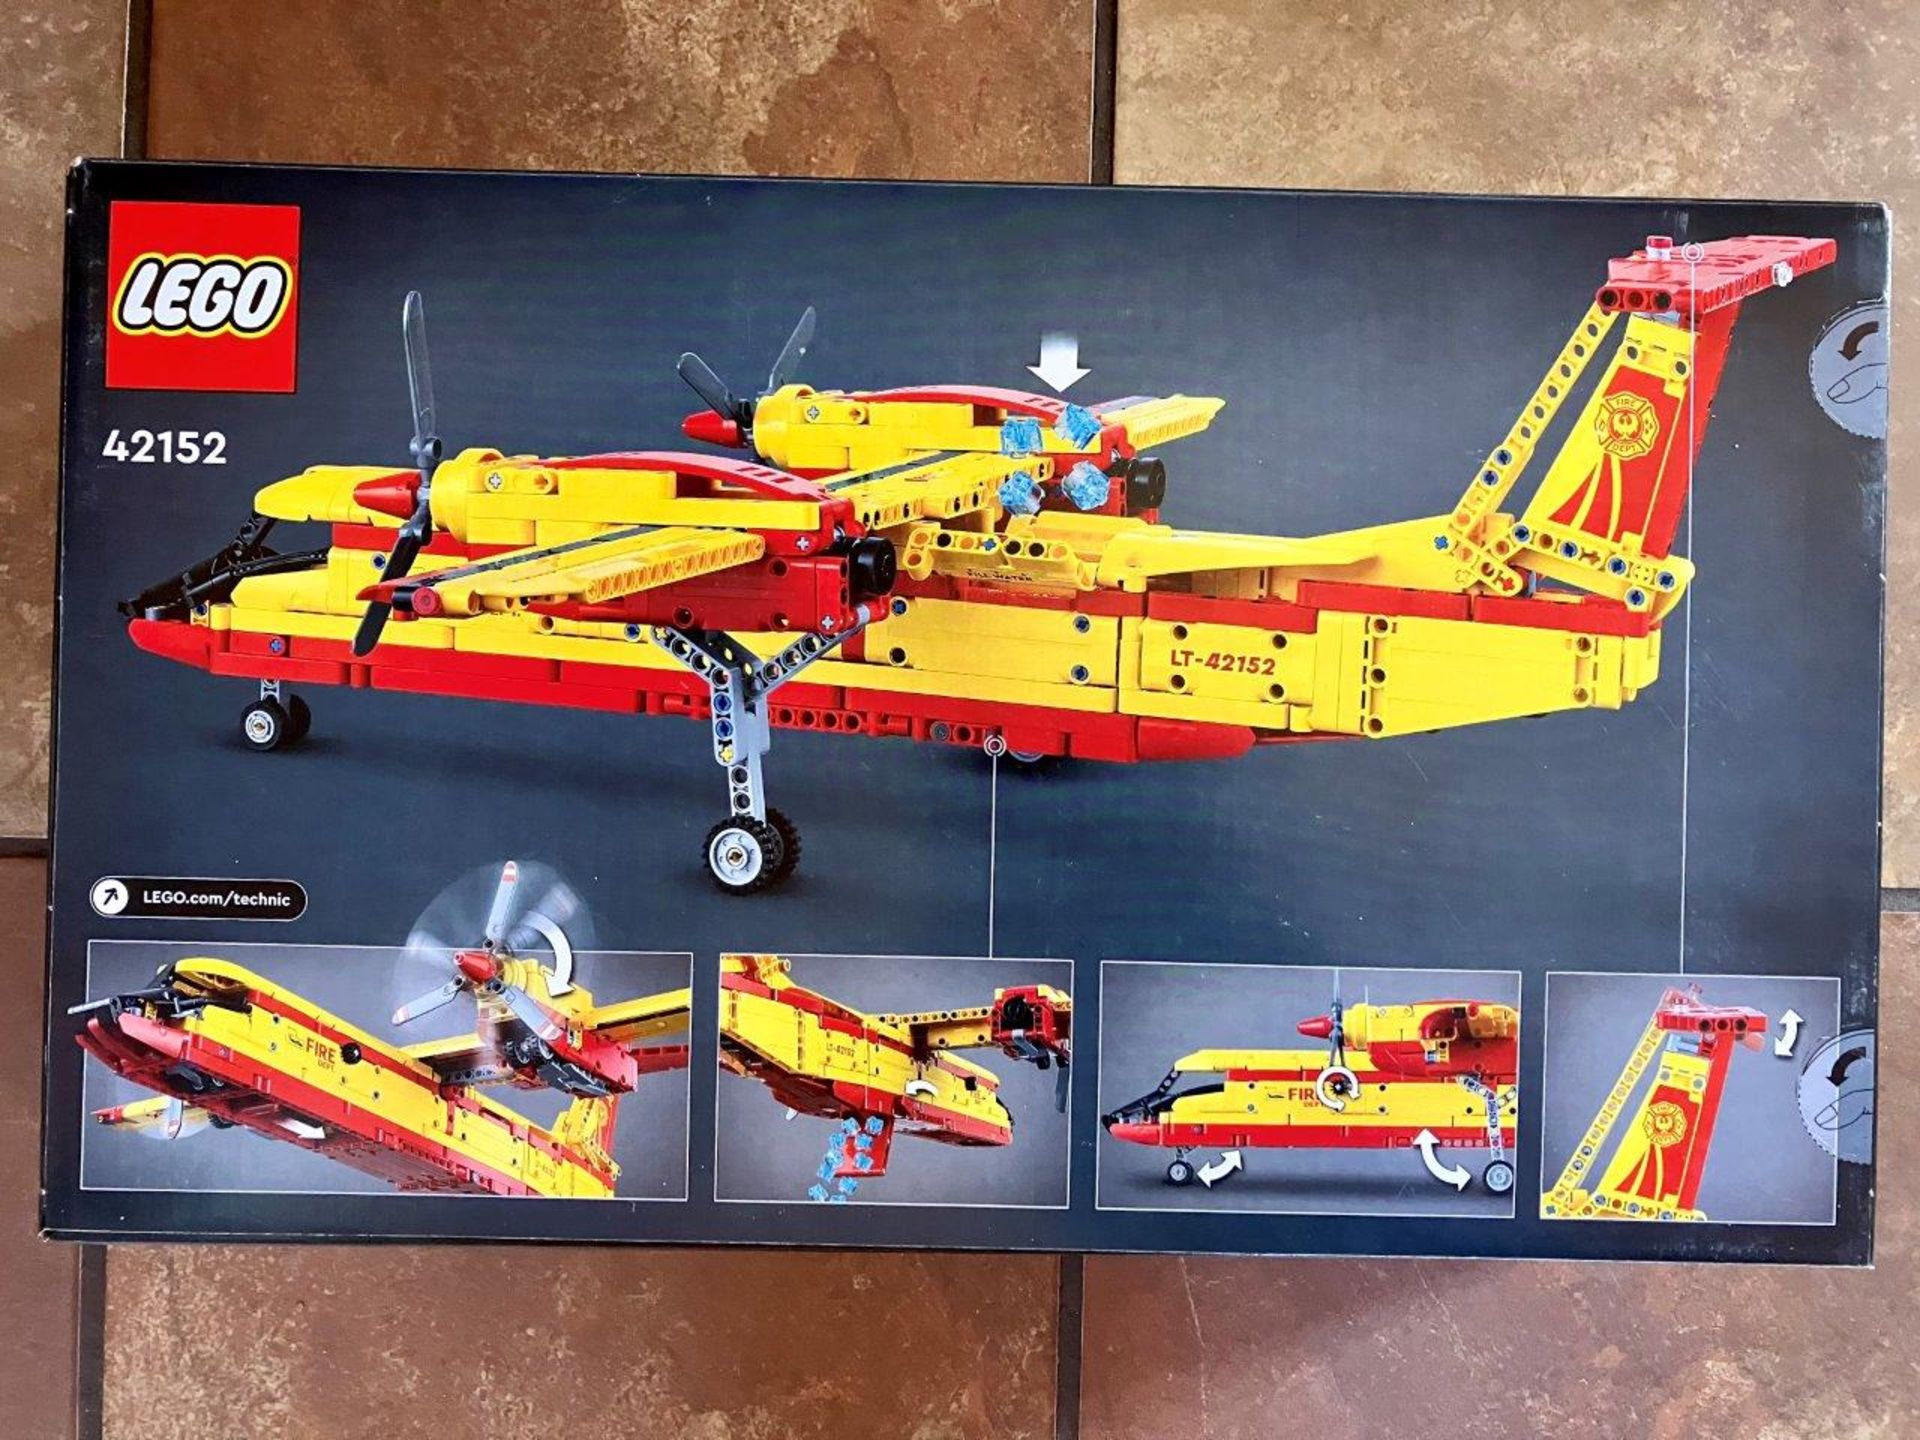 LEGO TECHNIC FIREFIGHTER AIRCRAFT (42152) - Image 2 of 2